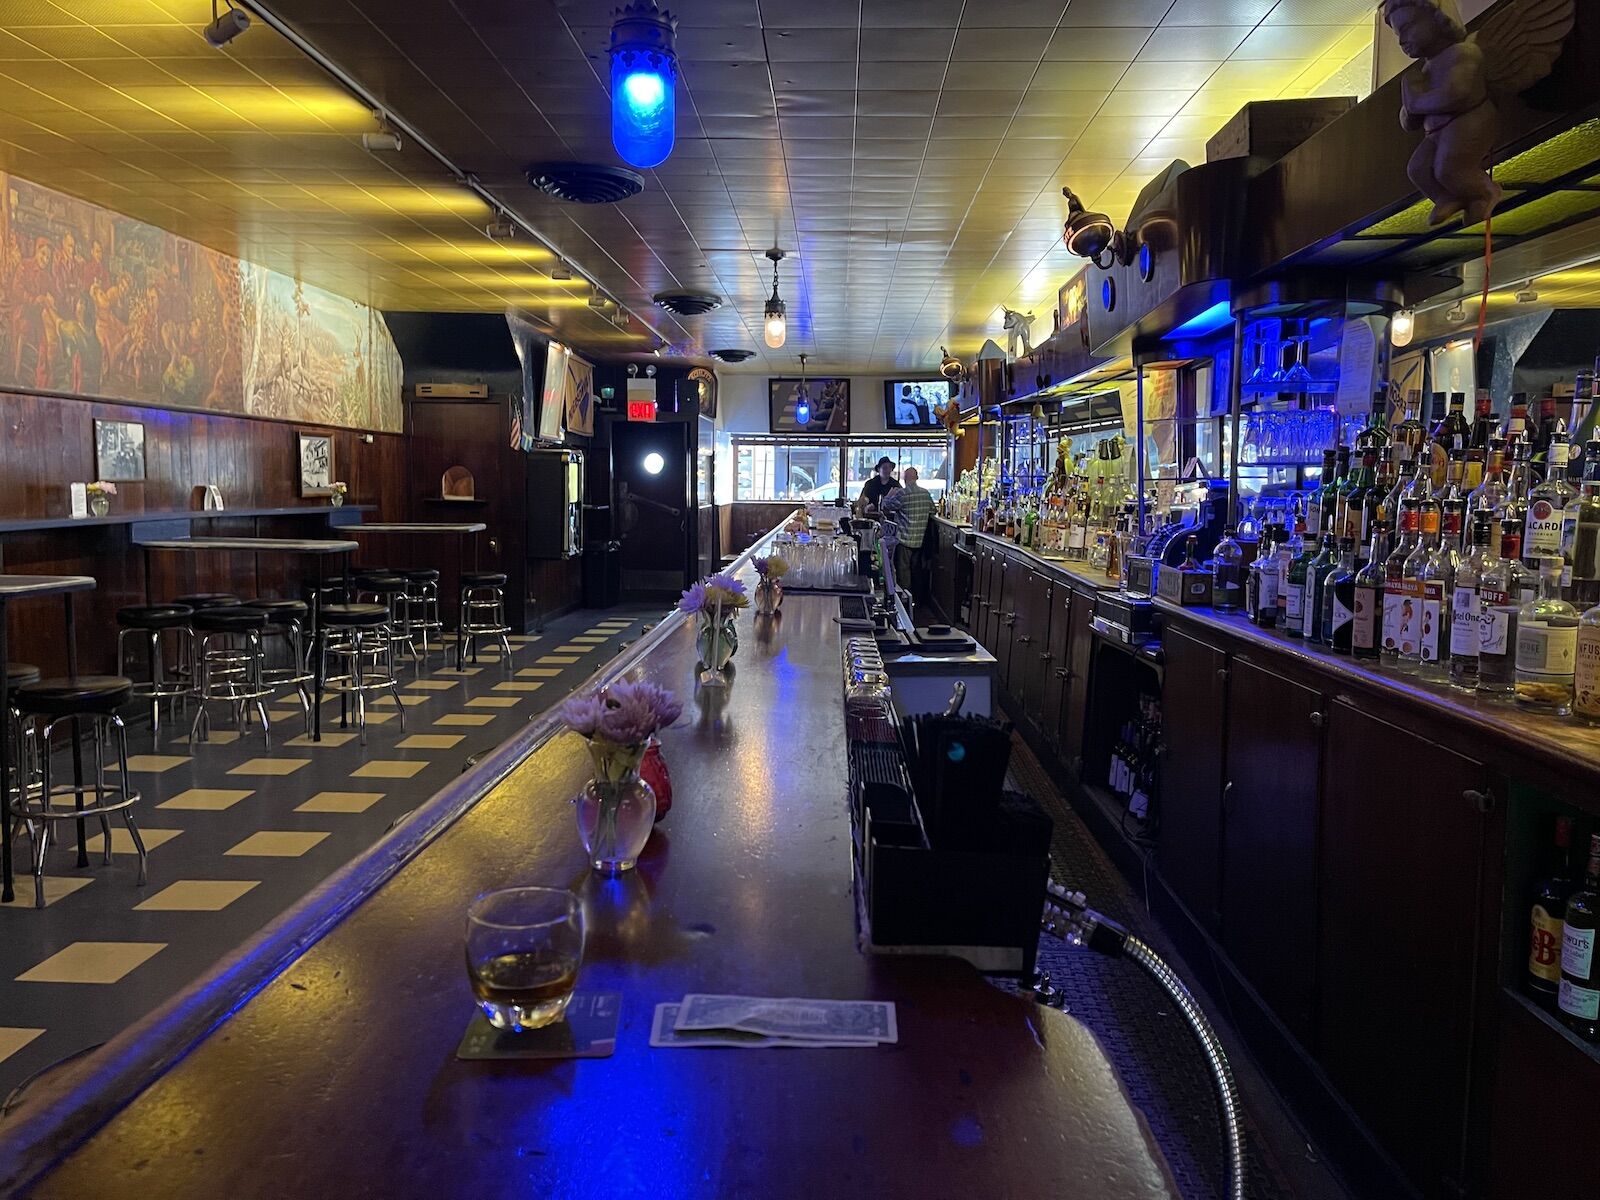 Simons dive bar Chicago with black and white tiled floors, bar, and bar stools 